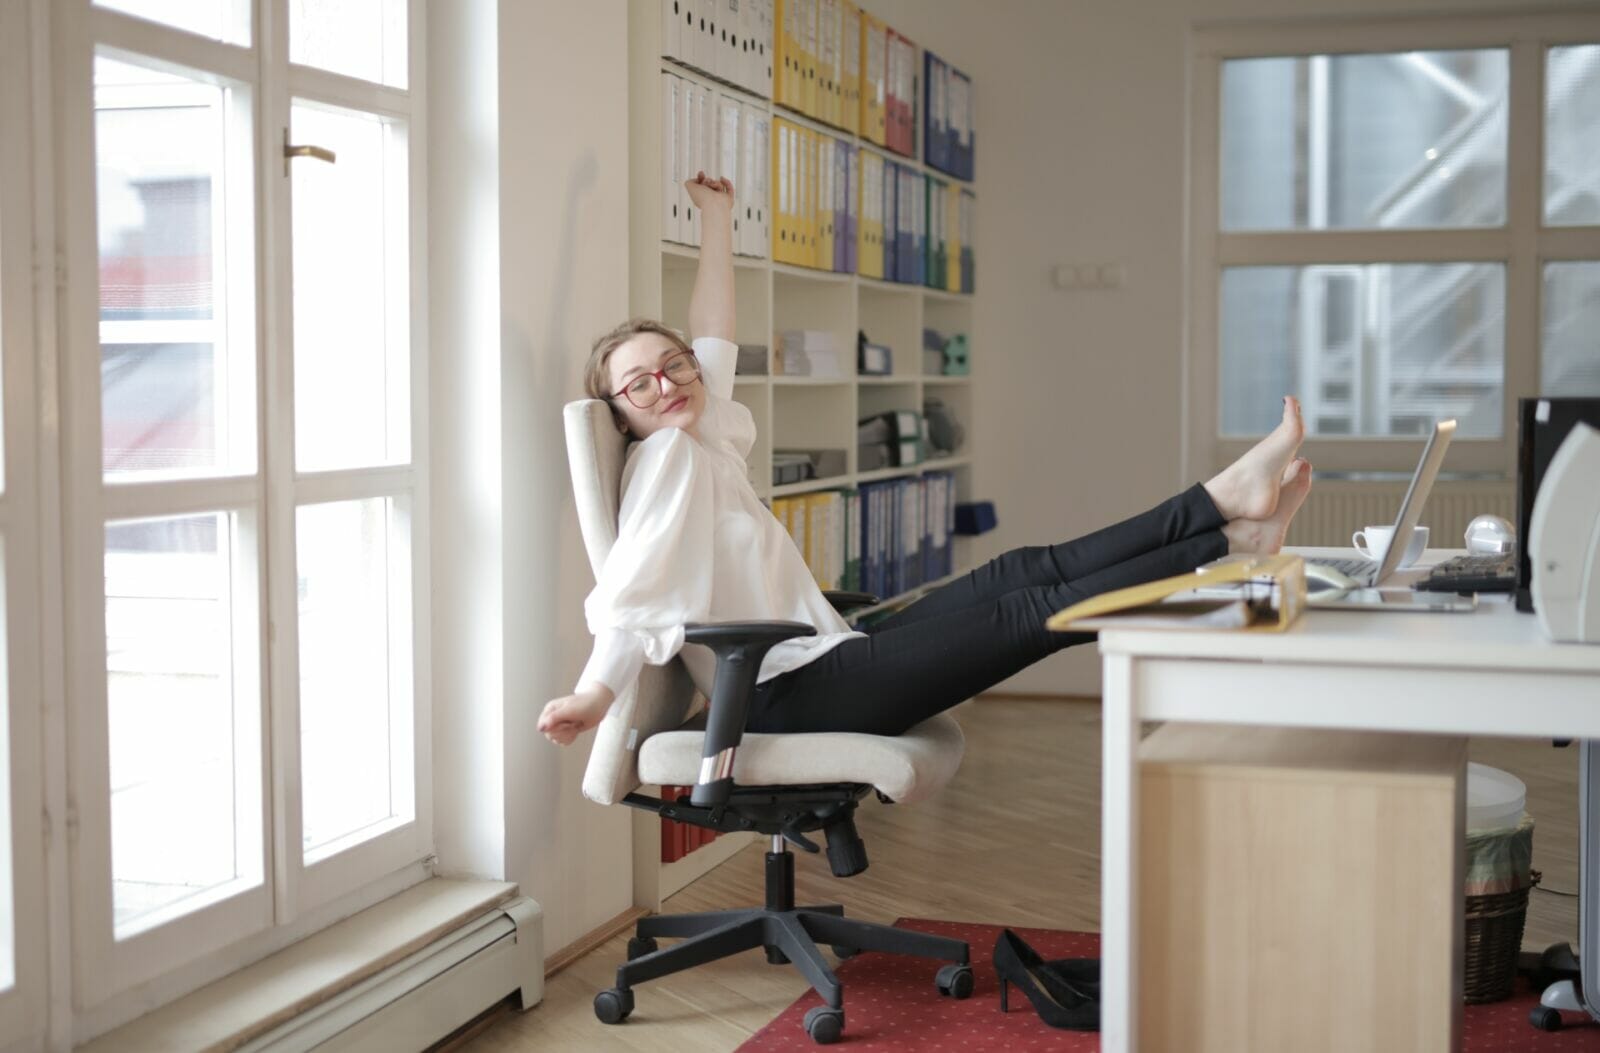 5 Benefits of Under Desk Foot Rests: Why Are They Good for You?